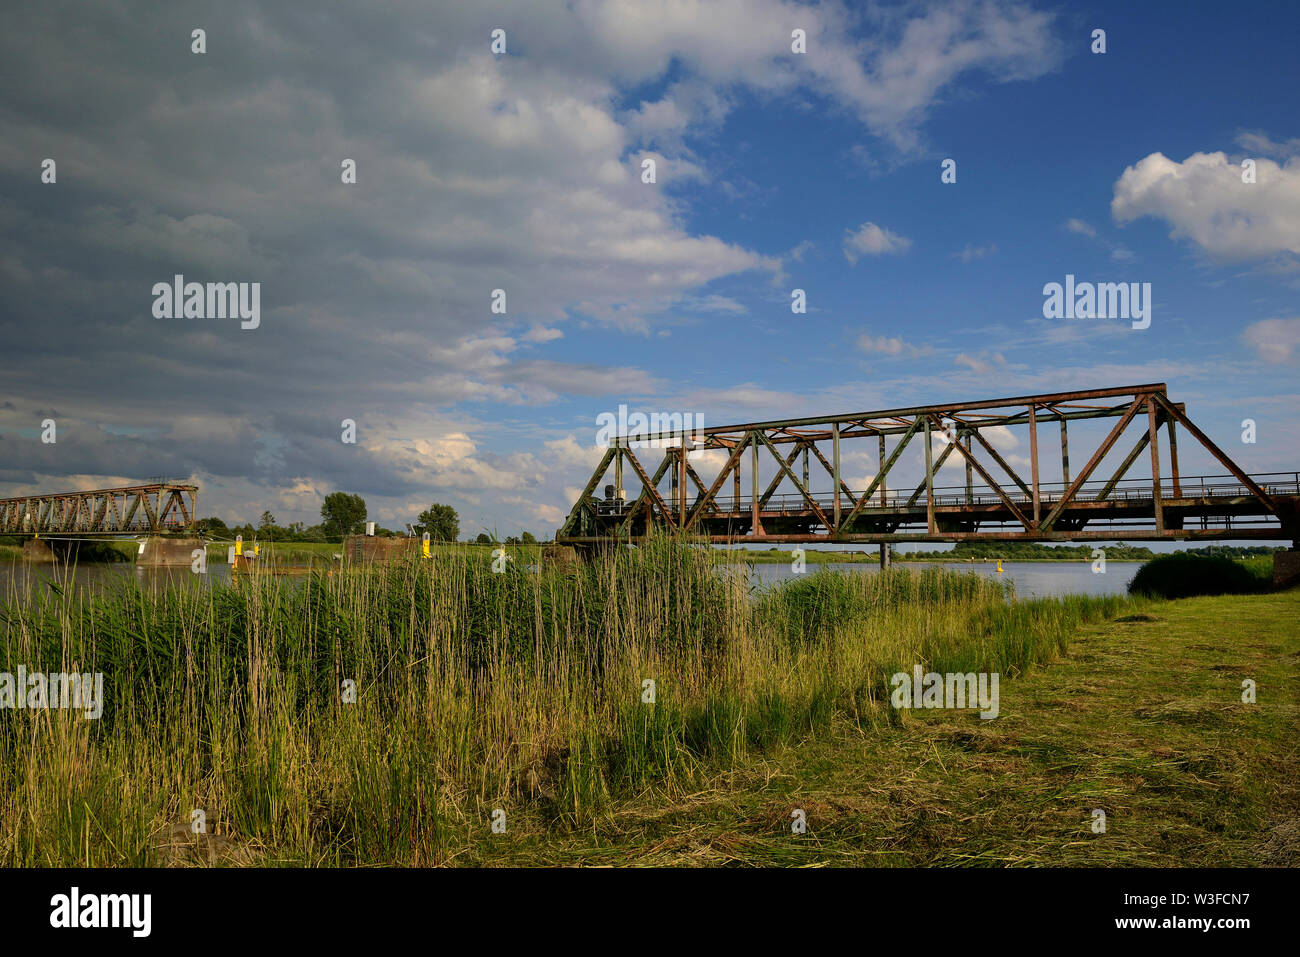 weener, niedersachsen/germany - june 29, 2016: the friesen bridge crossing the ems river destroyed on devember 03 2015 during a collision with the car Stock Photo